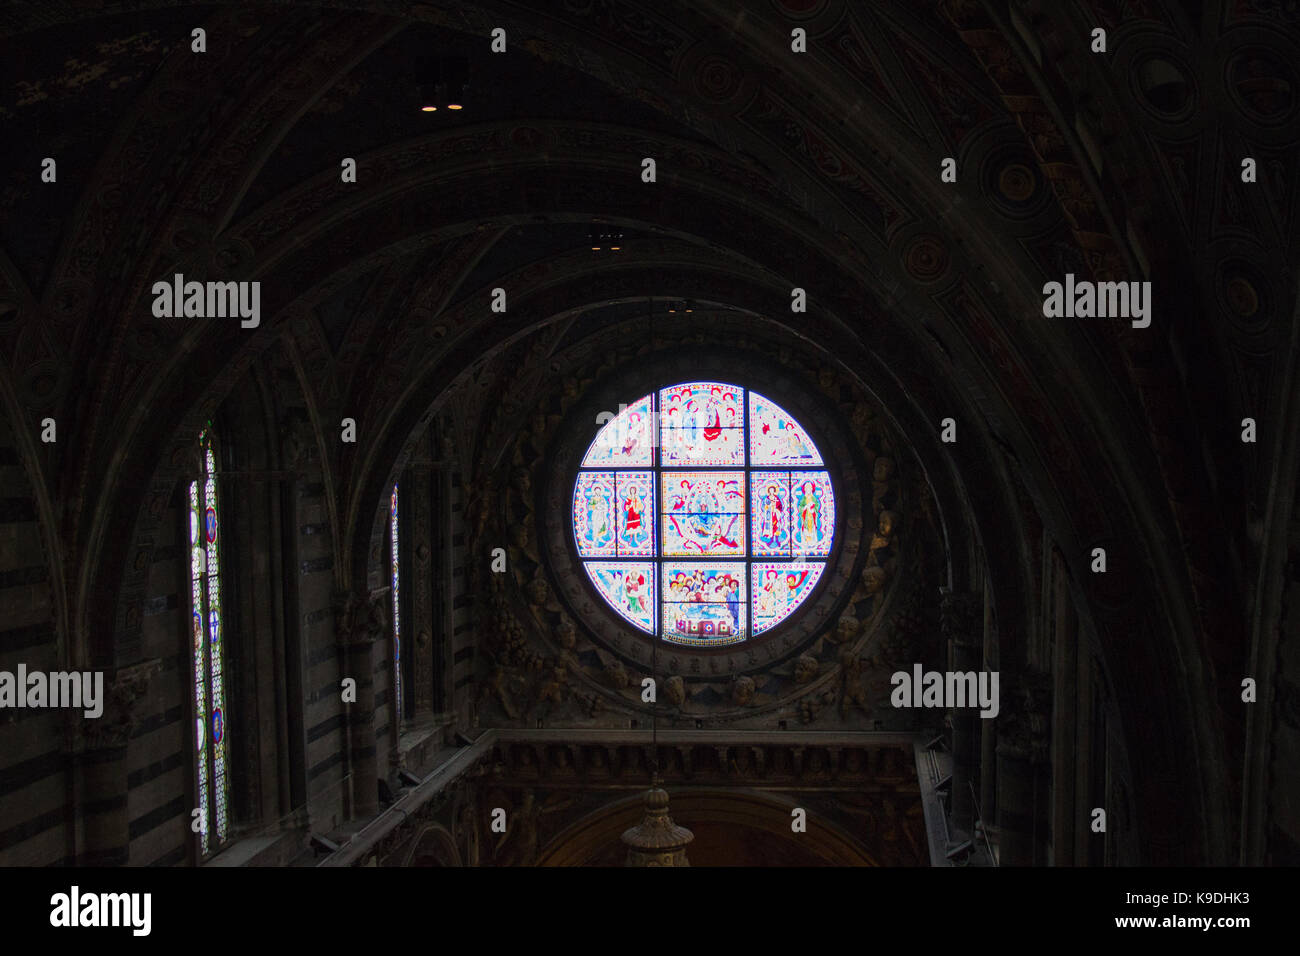 Italy, Siena - December 26 2016: interior view of Metropolitan Cathedral of Santa Maria Assunta. Duccio di buoninsegna is stained glass window of the  Stock Photo